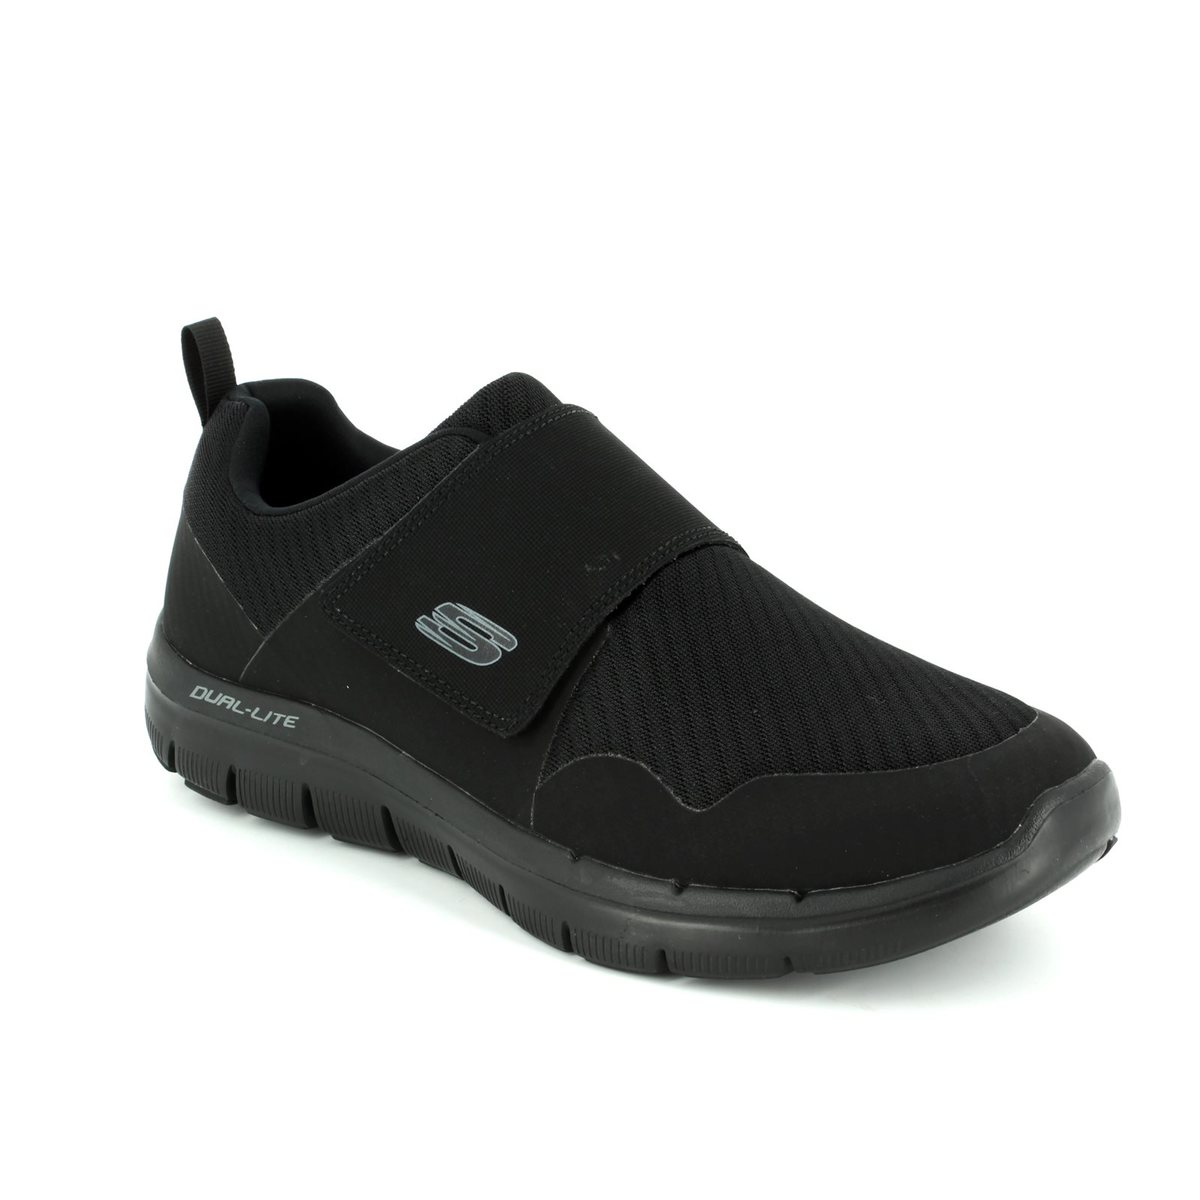 Skechers Mens Tennis Shoes With Velcro | vlr.eng.br